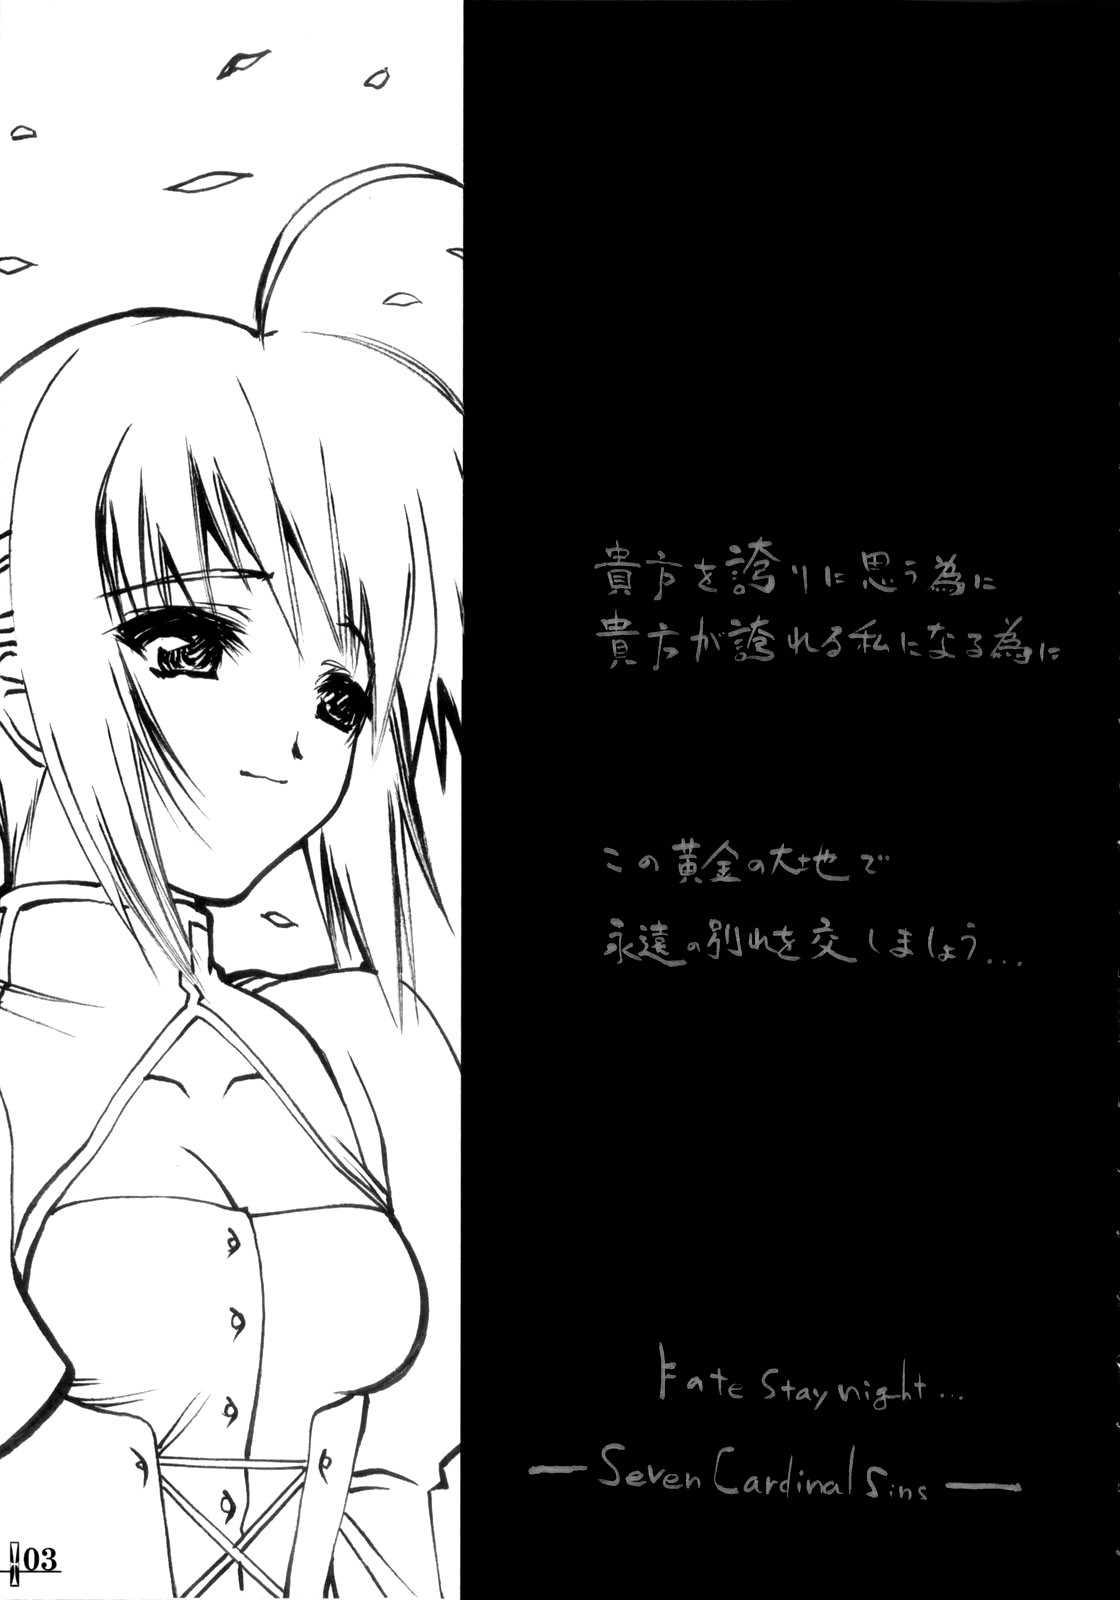 Free Oral Sex Seven Cardinal Sins みりおんばんく - Fate stay night Amatuer - Page 2